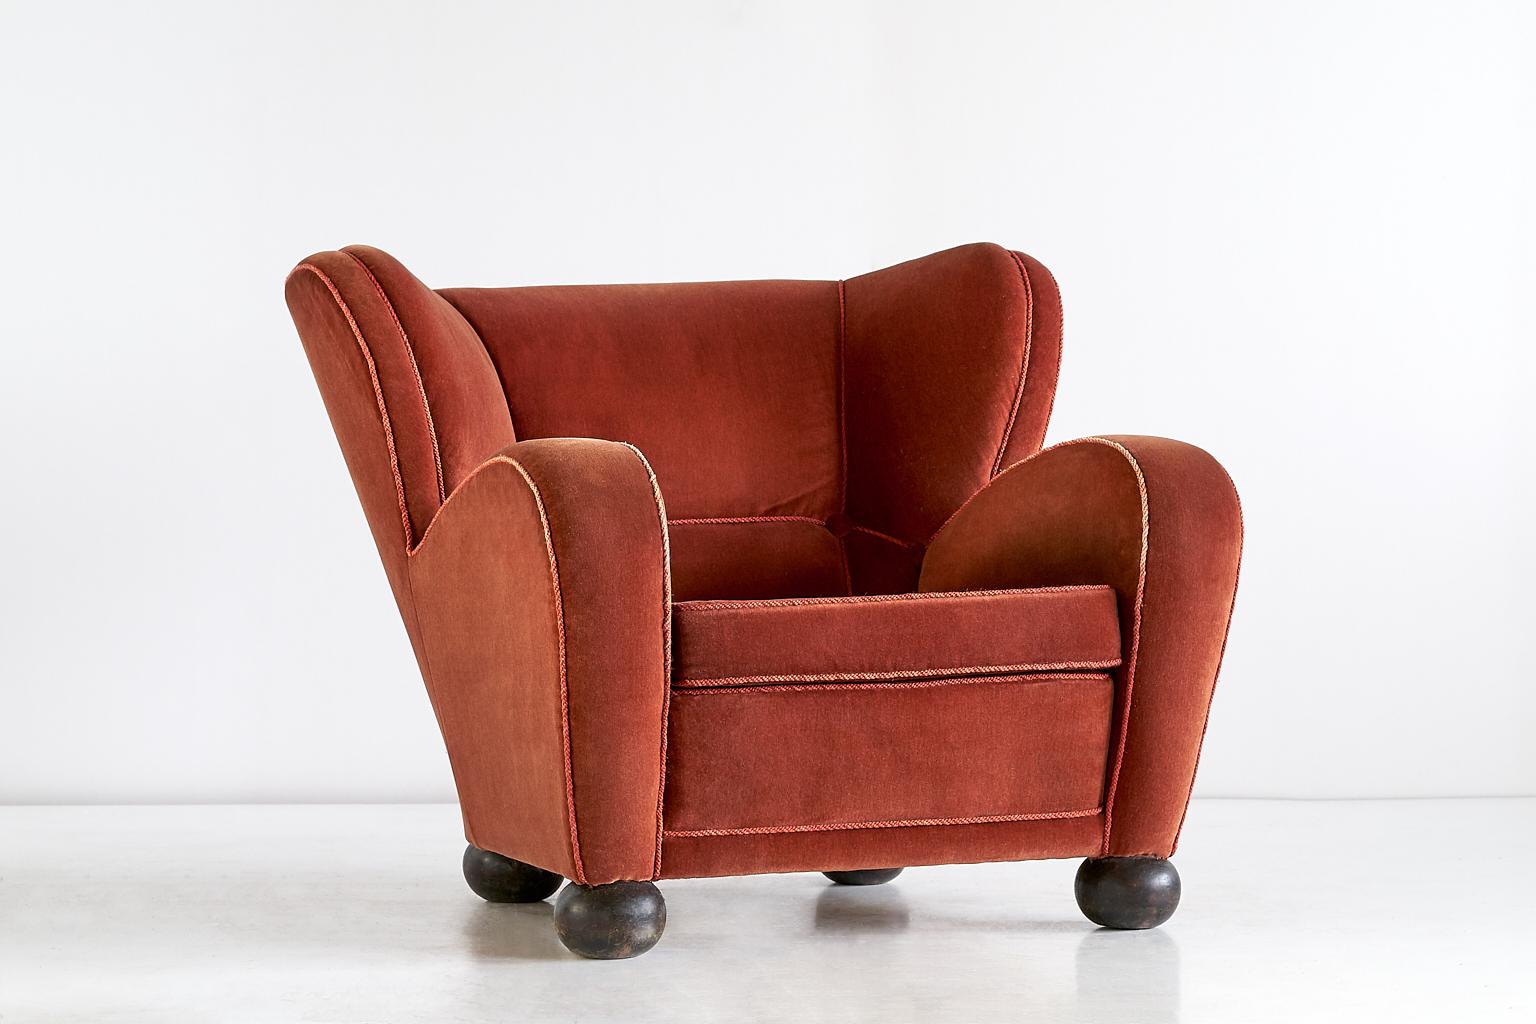 This rare armchair was designed by Märta Blomstedt and produced in Finland in 1939. The generous dimensions and seat depth make this a very comfortable lounge chair. 
The four round bun feet are in stained birch wood. The chair still has its